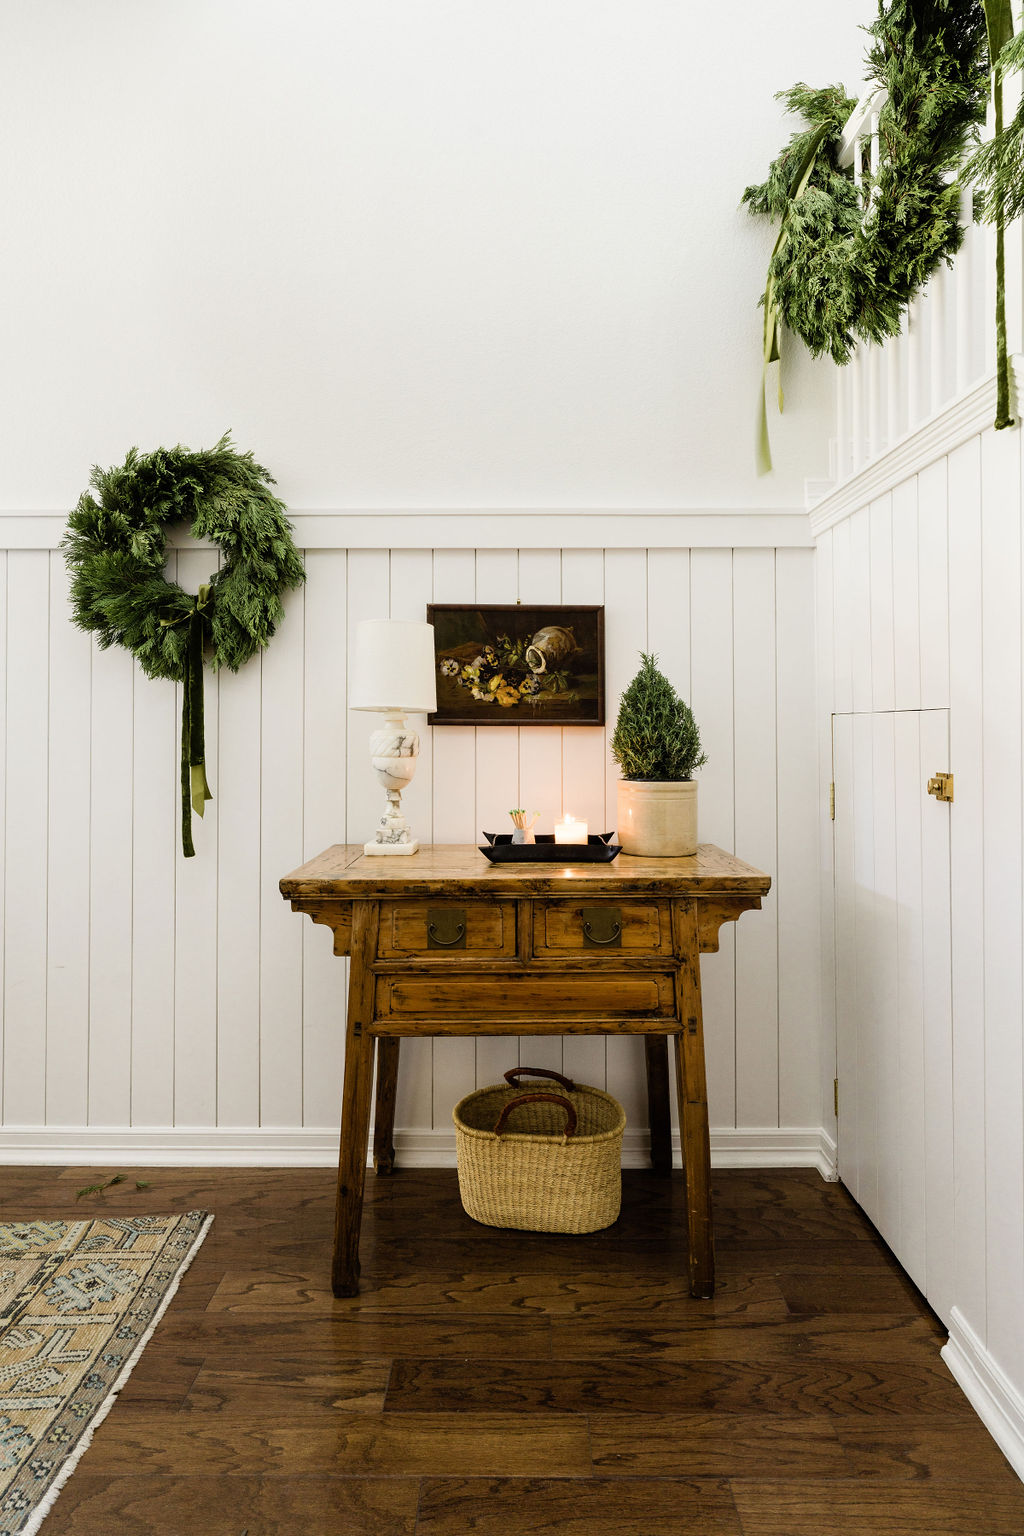 Entryway Christmas decor with fresh greens